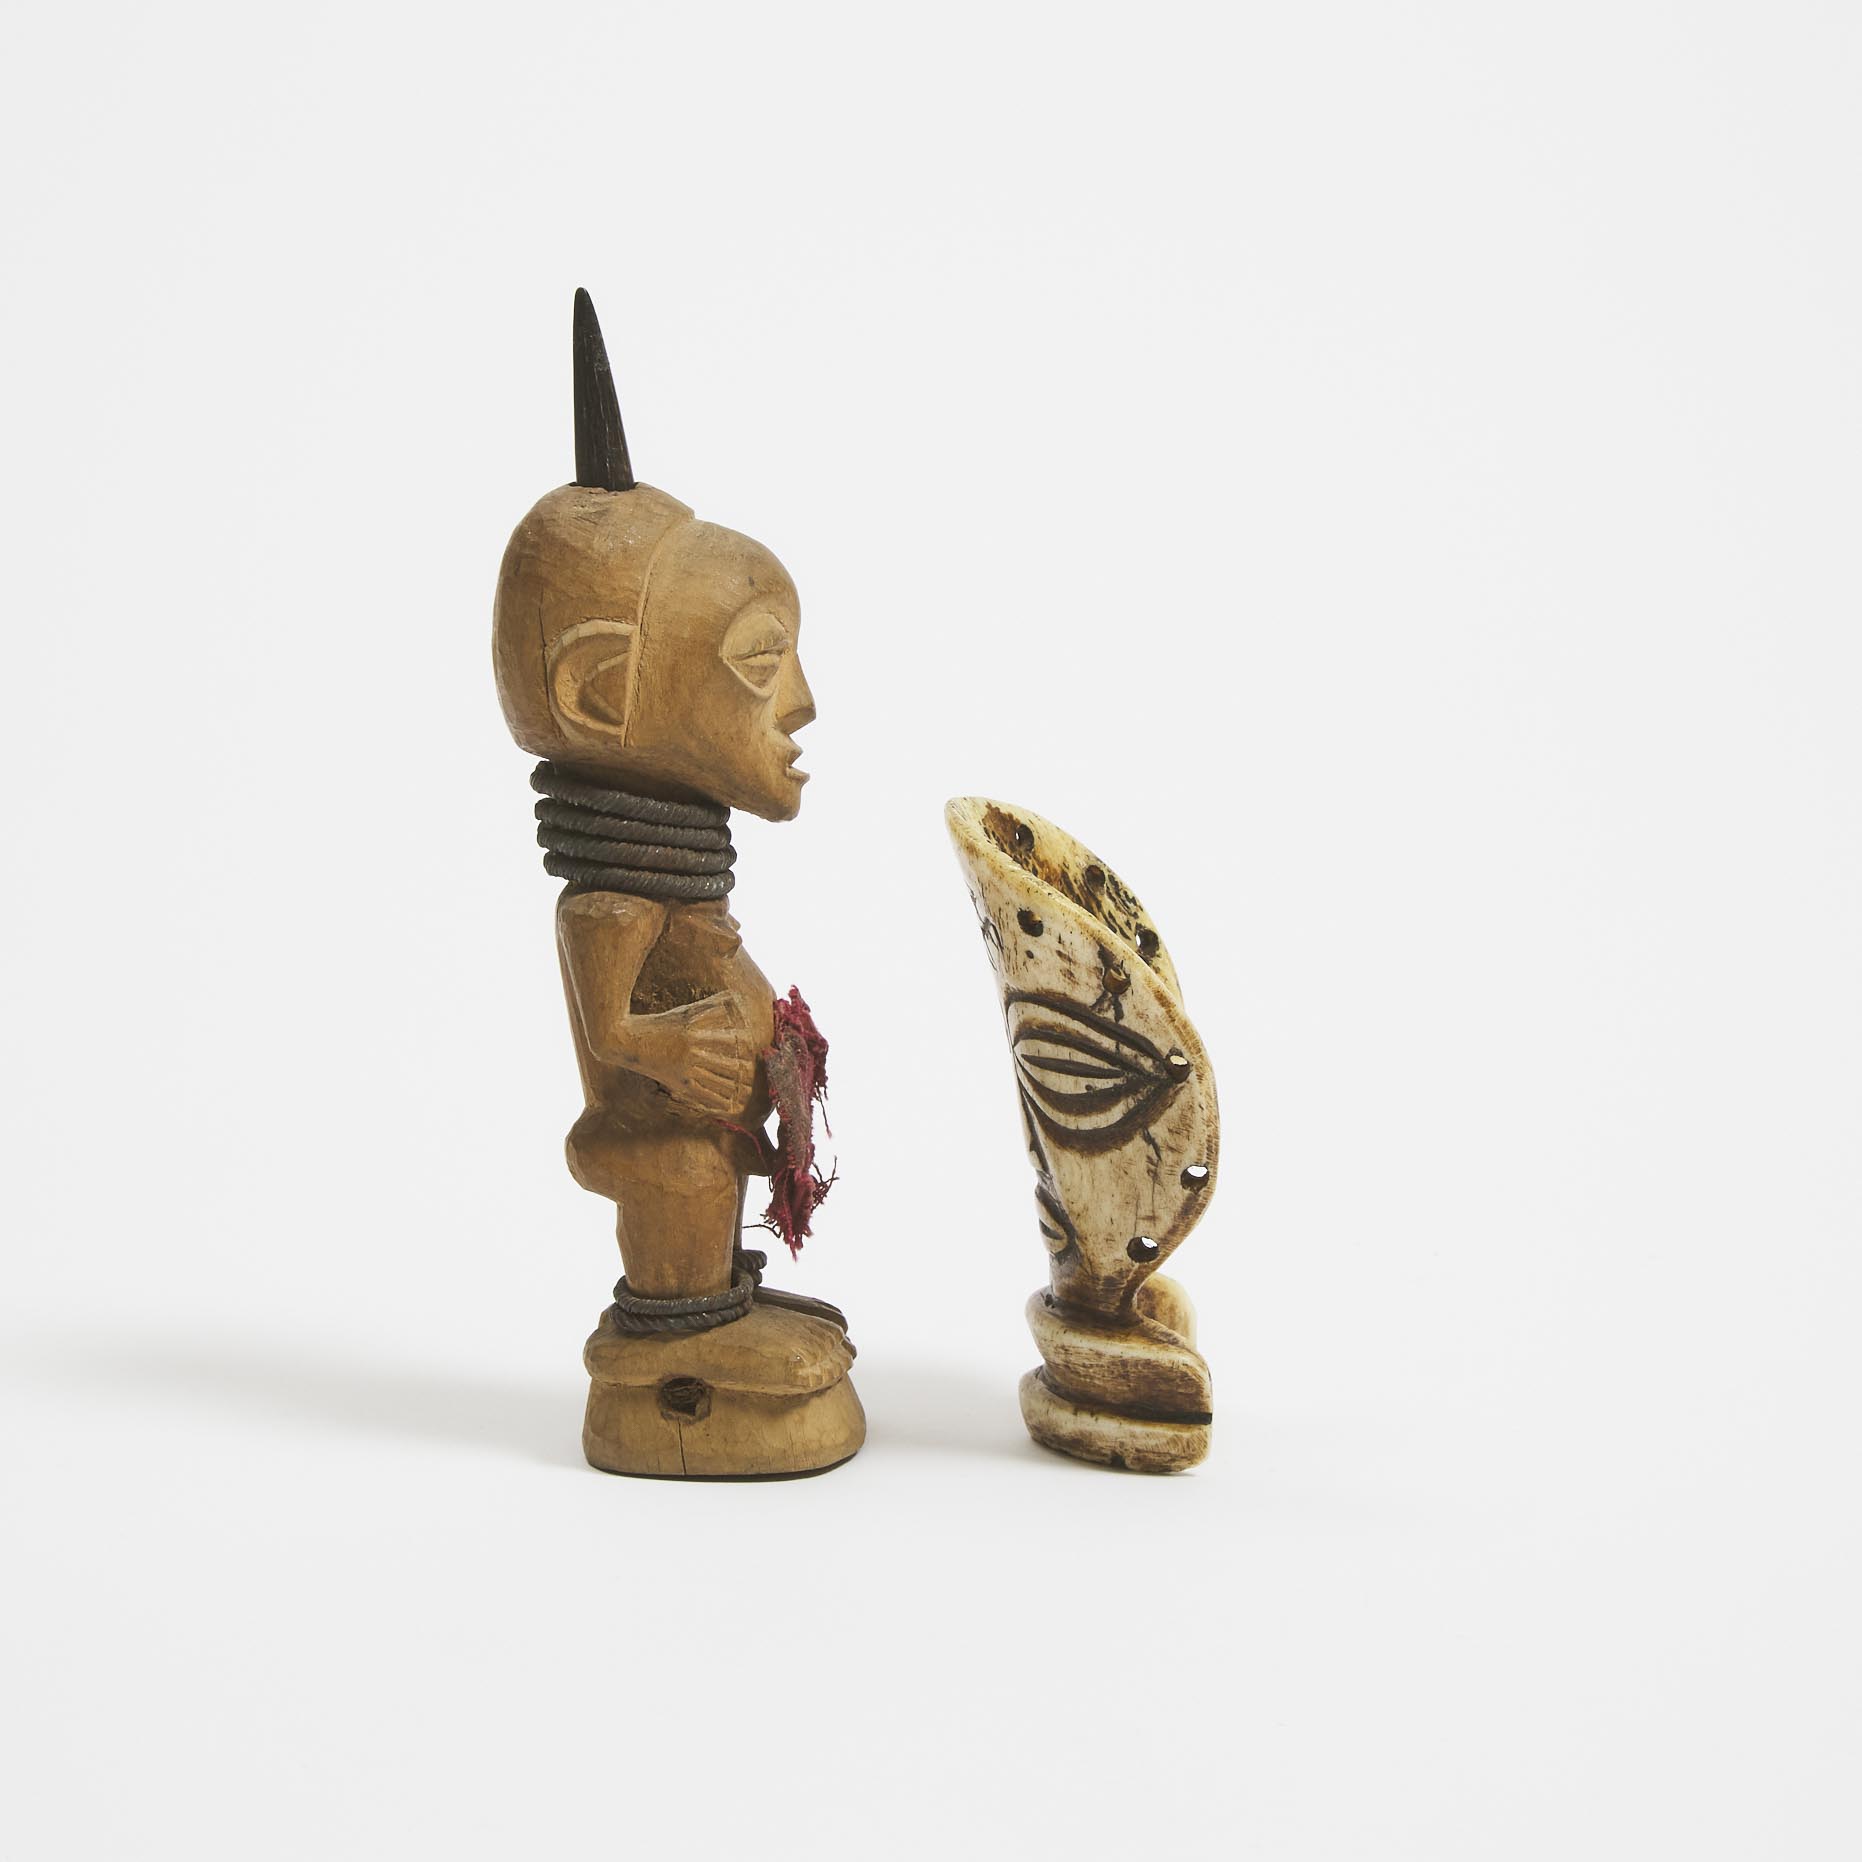 Chokwe Carved Bone Head together with a Small Songye Power Figure, Democratic Republic of Congo, both Central Africa, 20th century